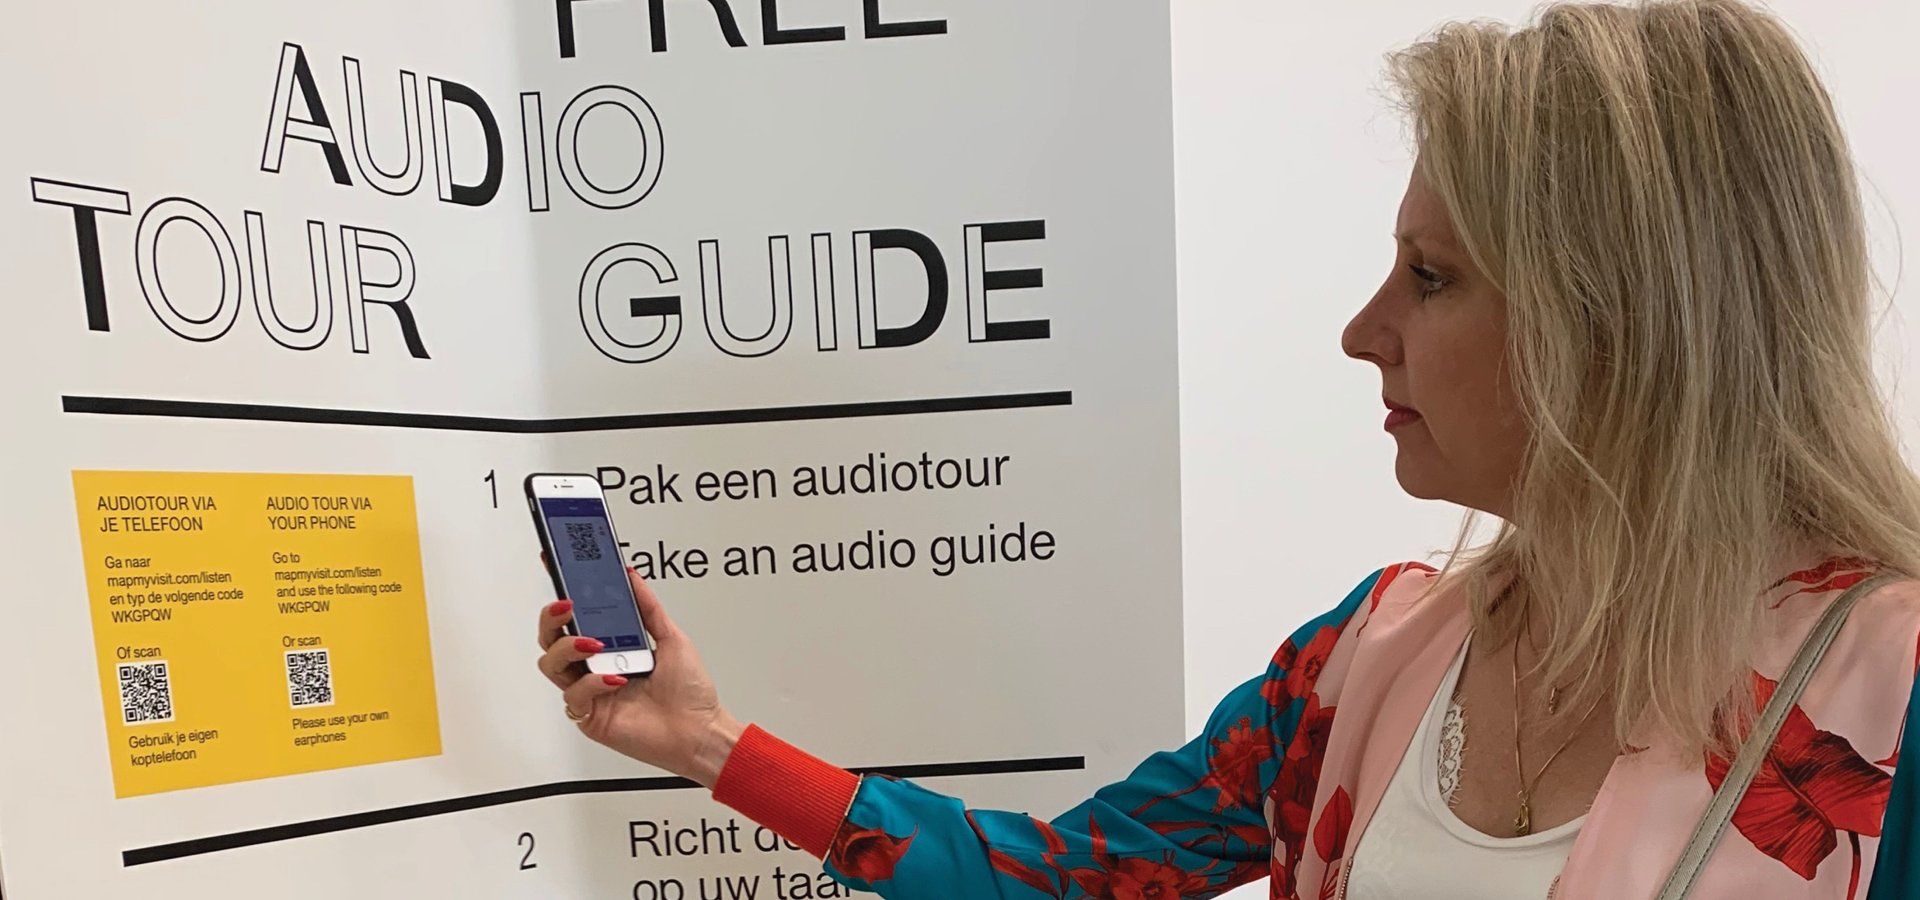 Marlise Meuter using her mobile phone to scan the QR code for the mobile website audio tour